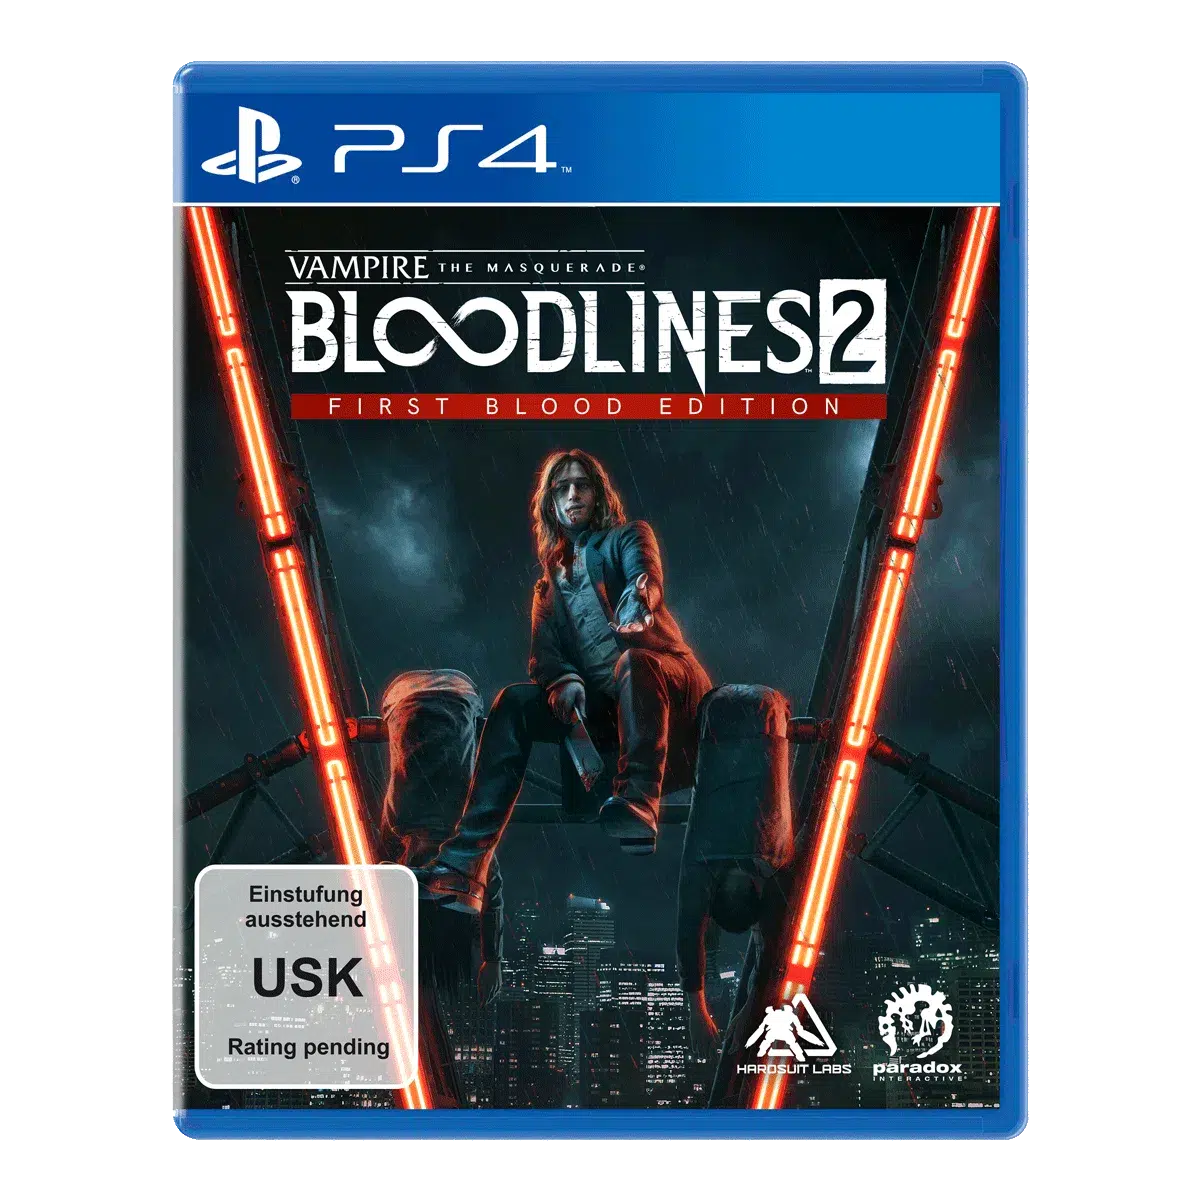 Vampire: The Masquerade Bloodlines 2 First Blood Edition (PS4) (USK)